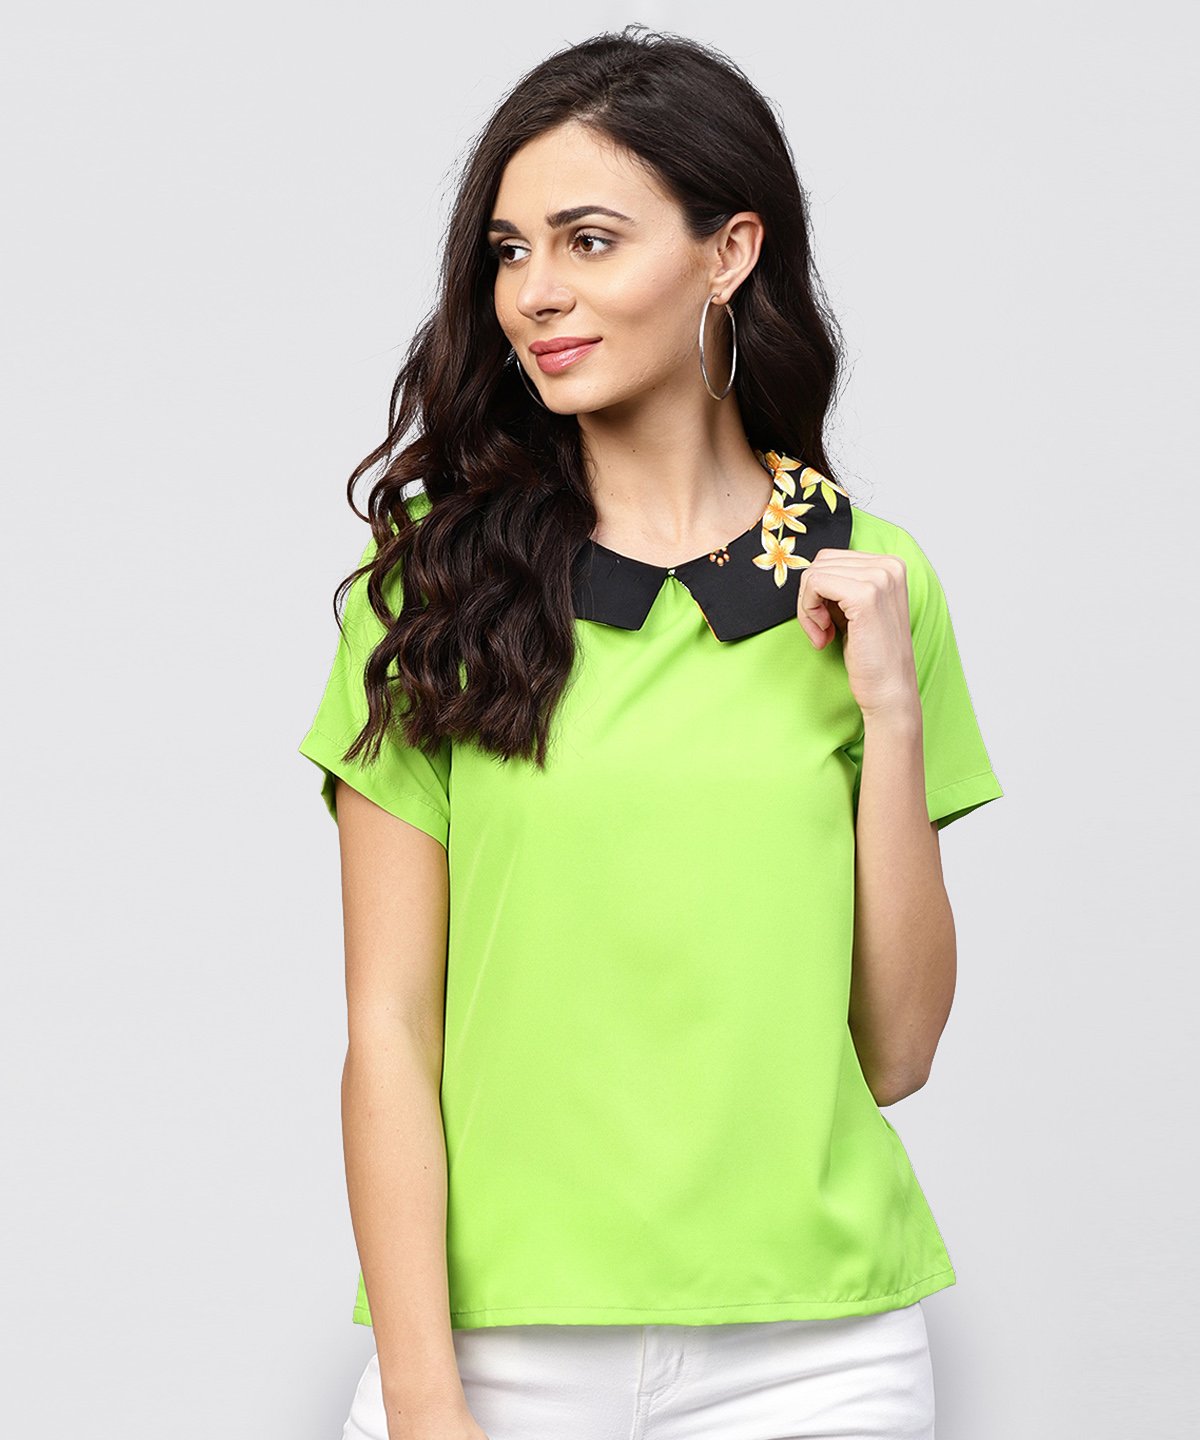 Women's Parrot Green Top With Half Sleeves And Collar - Nayo Clothing